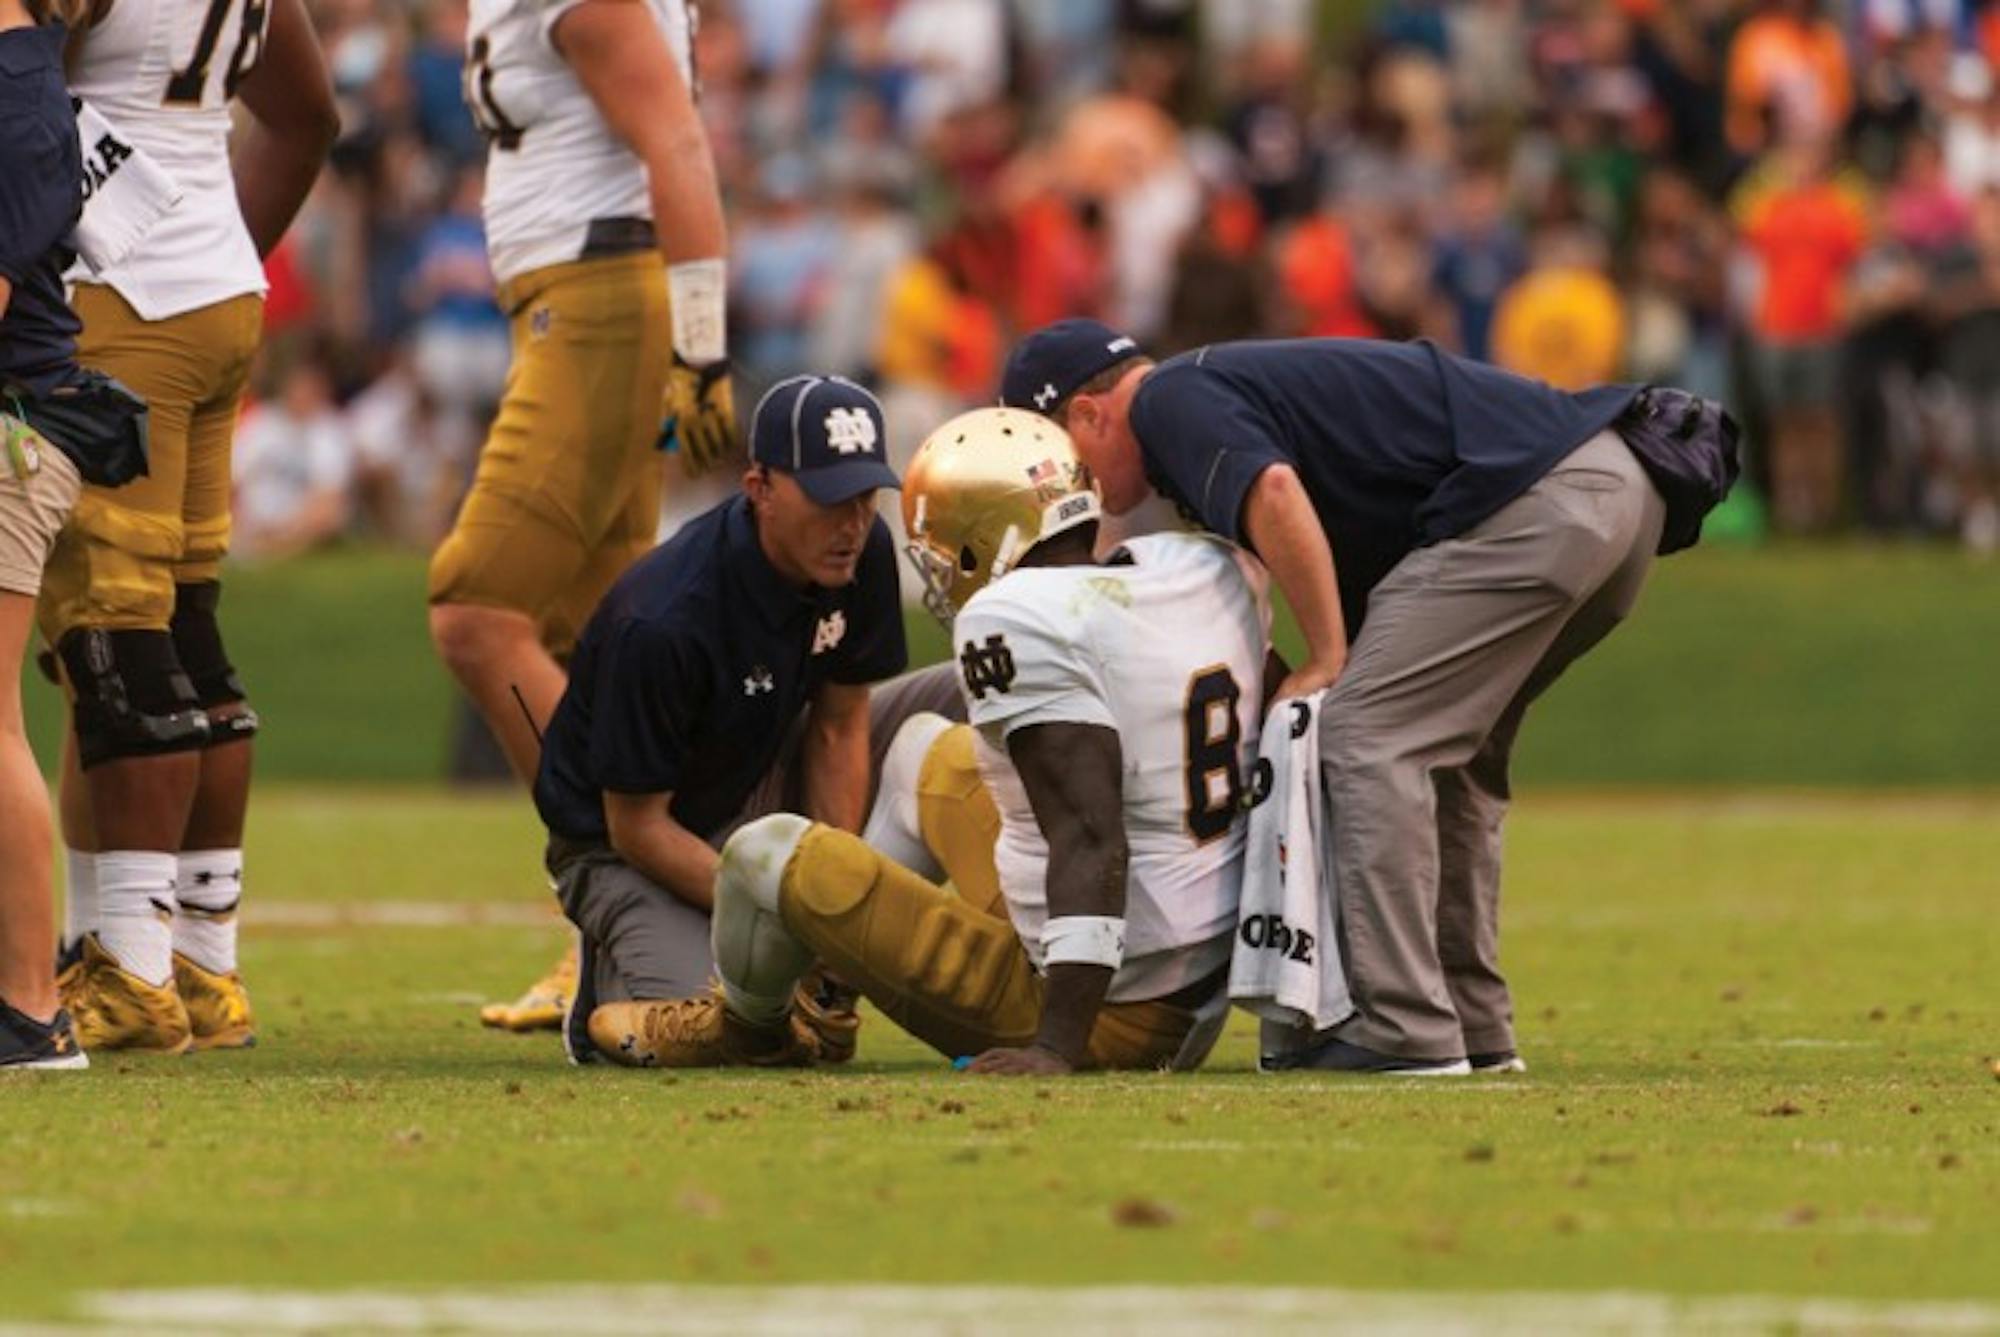 Irish junior quarterback Malik Zaire is surrounded by trainers after fracturing his ankle during Notre Dame’s 34-27 win over Virginia on Saturday at Scott Stadium. Zaire threw for 115 yards and a touchdown in Charlottesville, Virginia, before going down with the season-ending injury near the end of the third quarter.